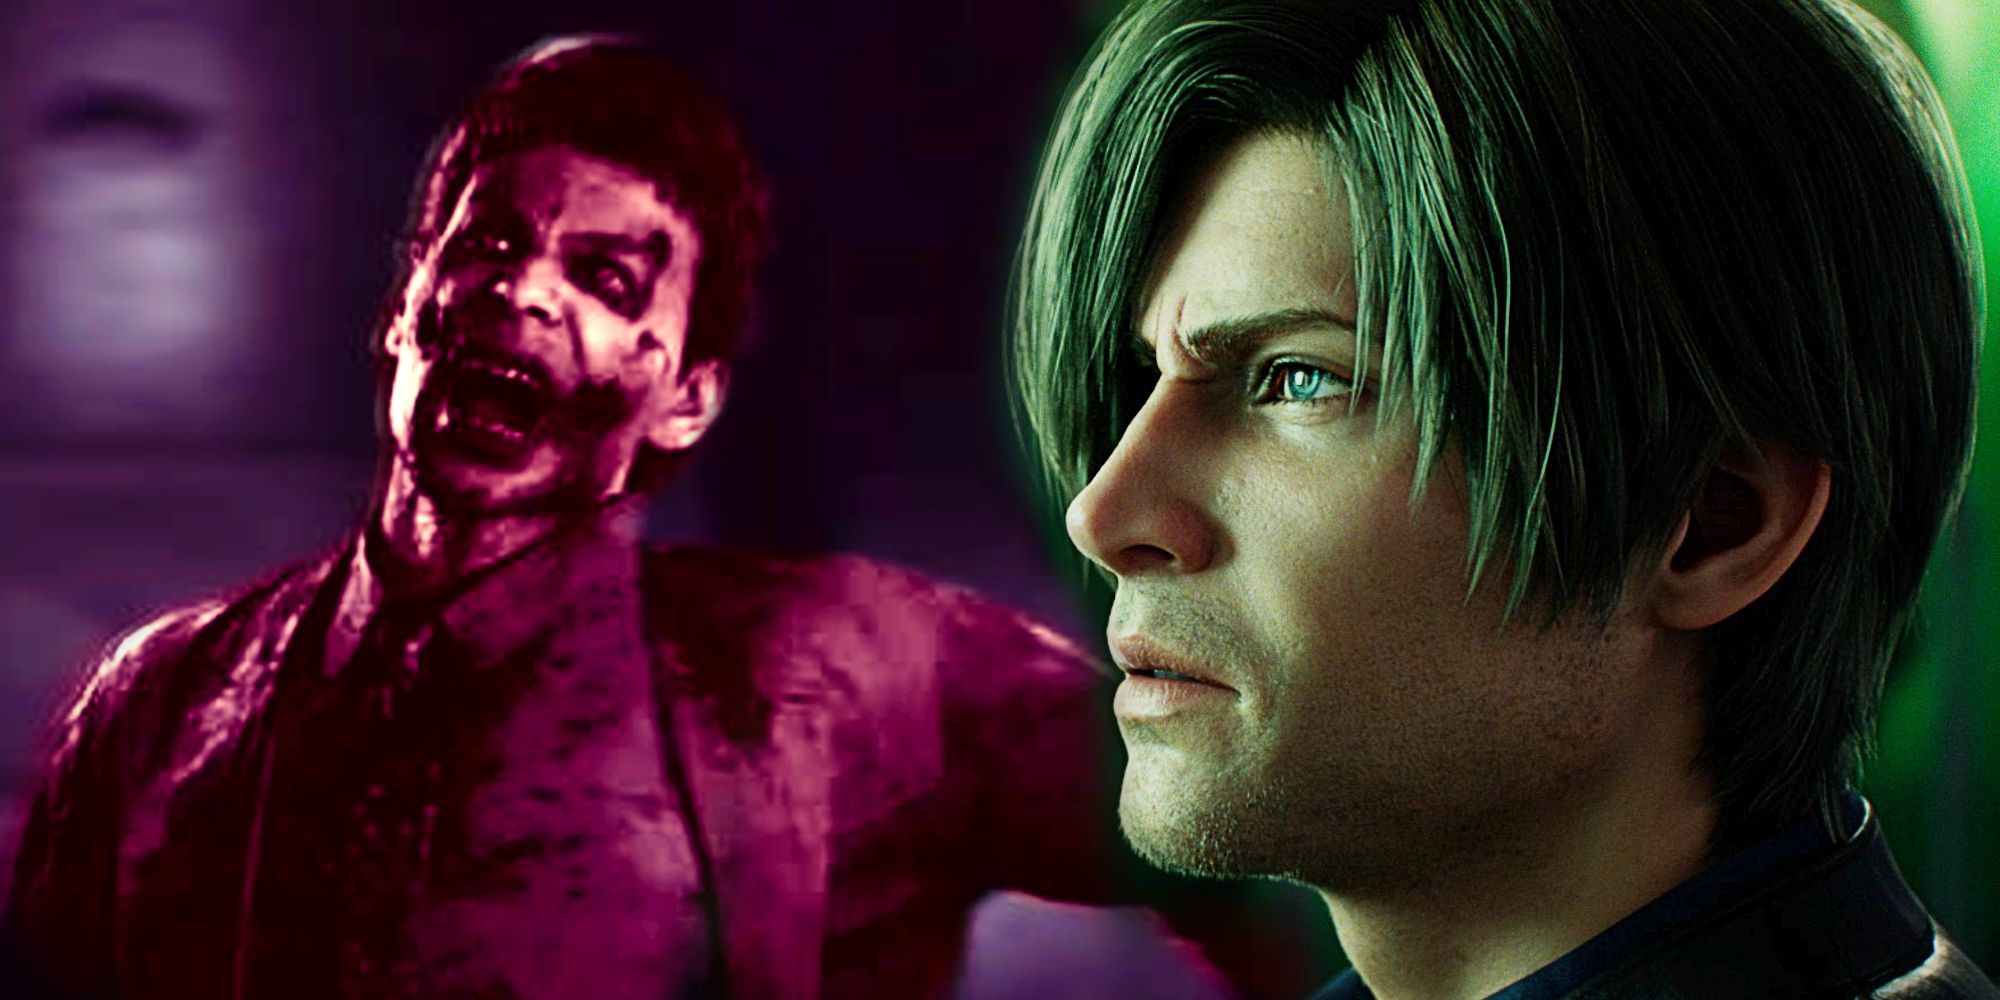 Leon Kennedy and Zombie in Resident Evil: Infinite Darkness